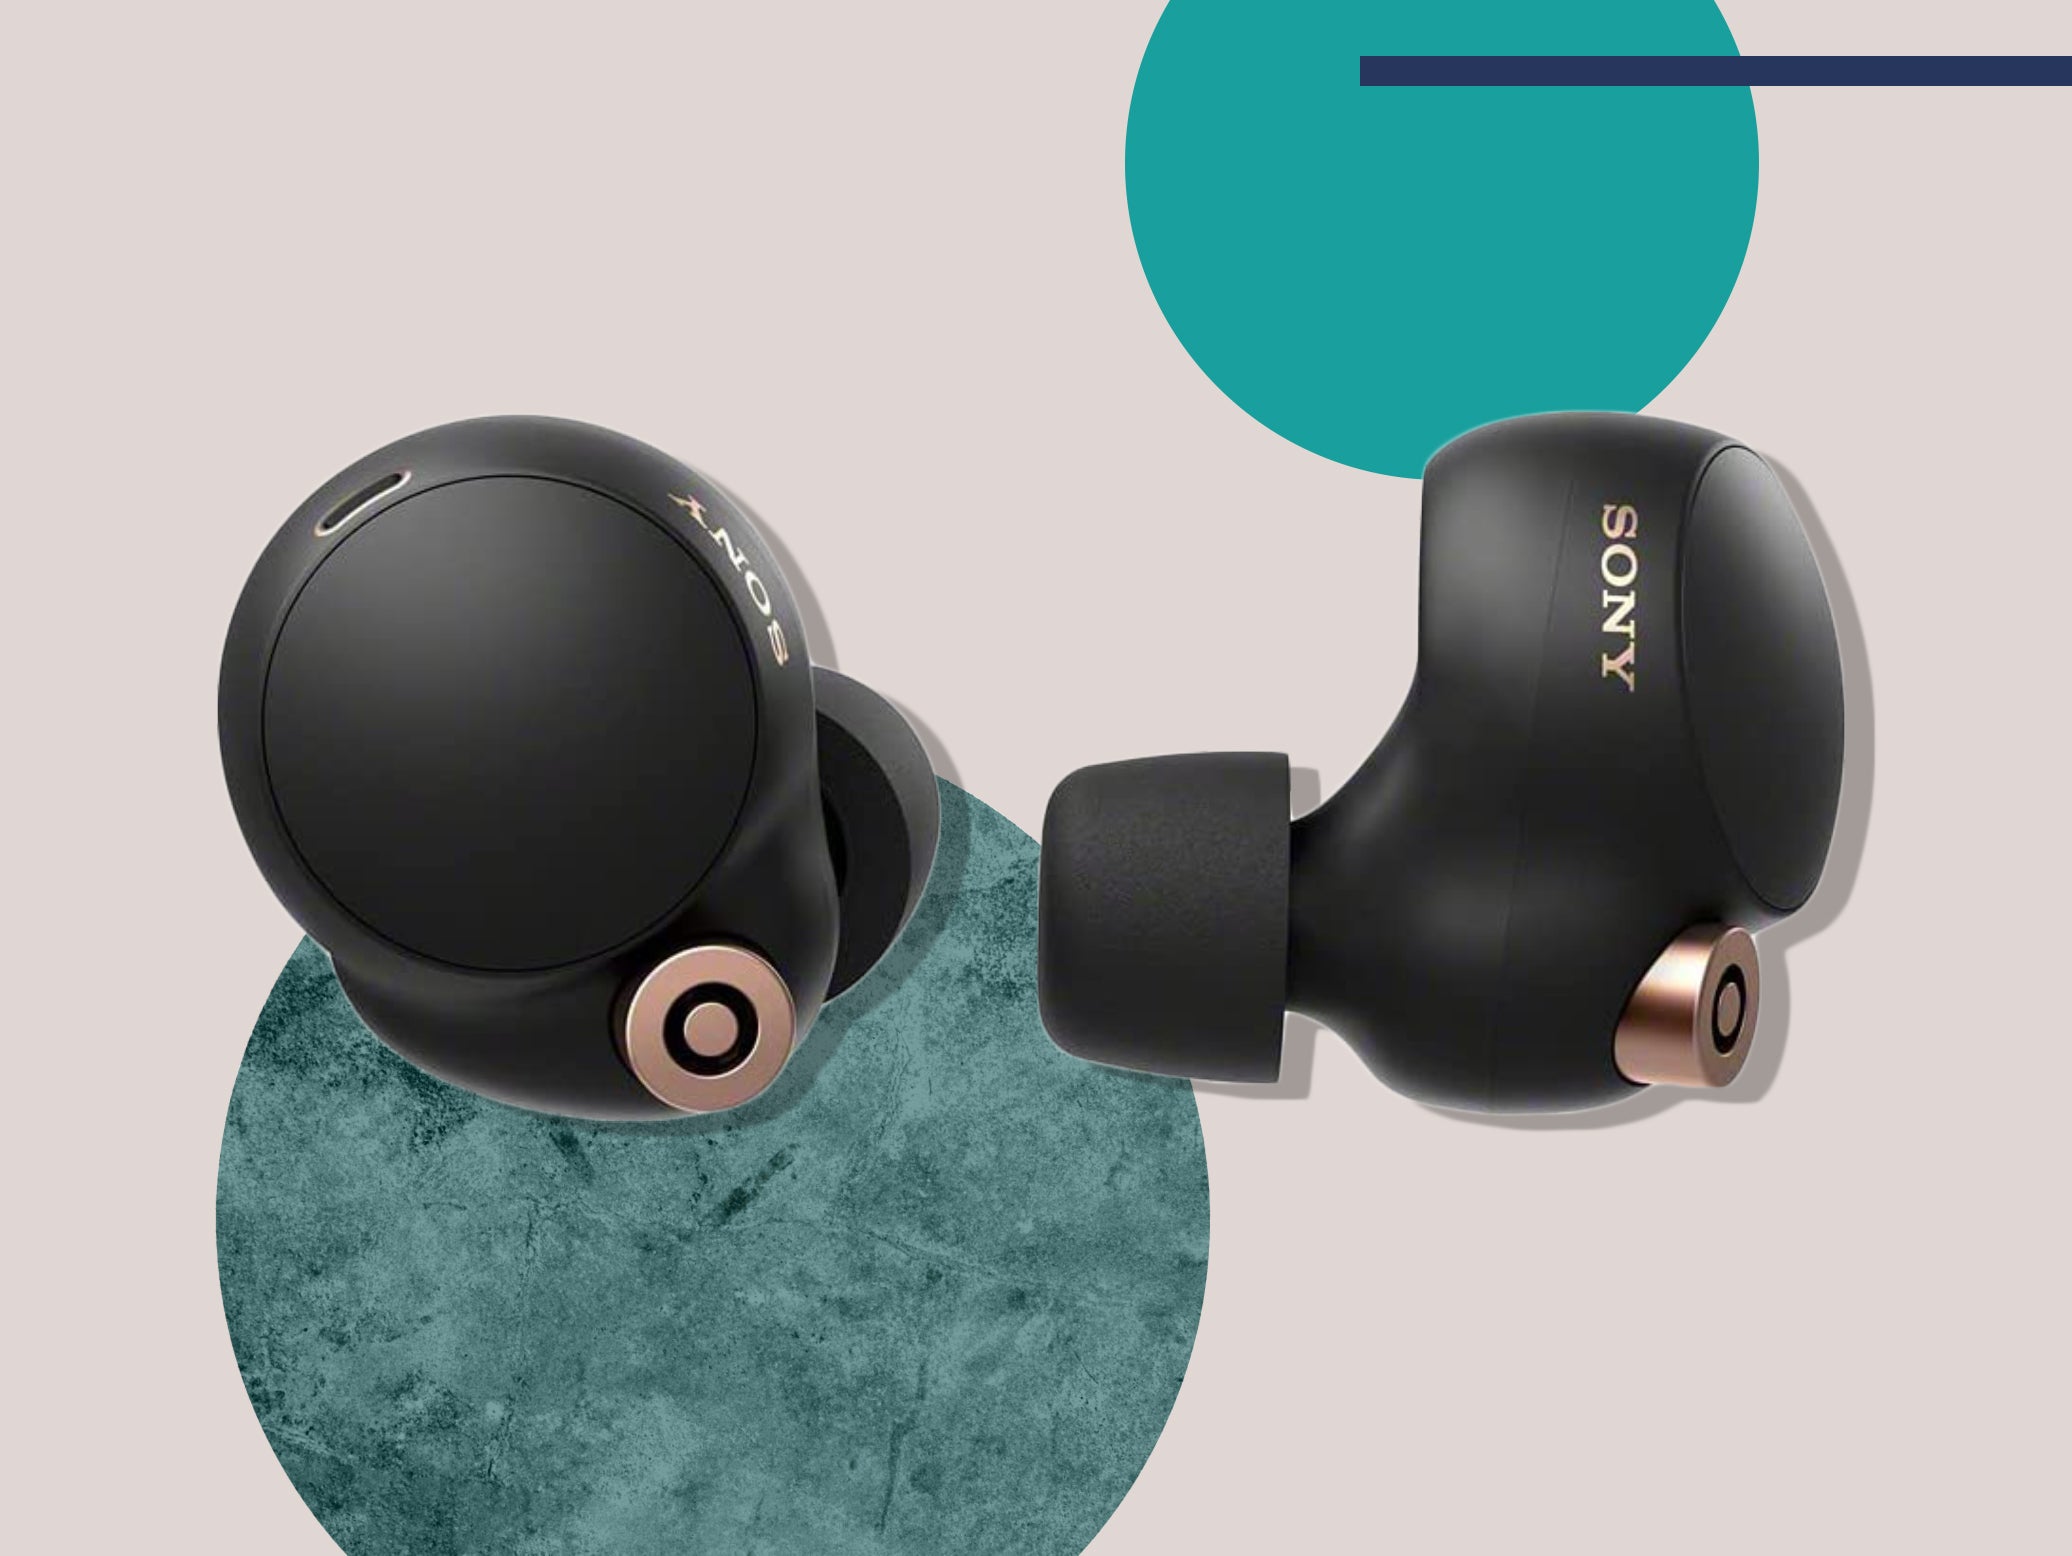 The noice-cancelling earphones are among our favourites